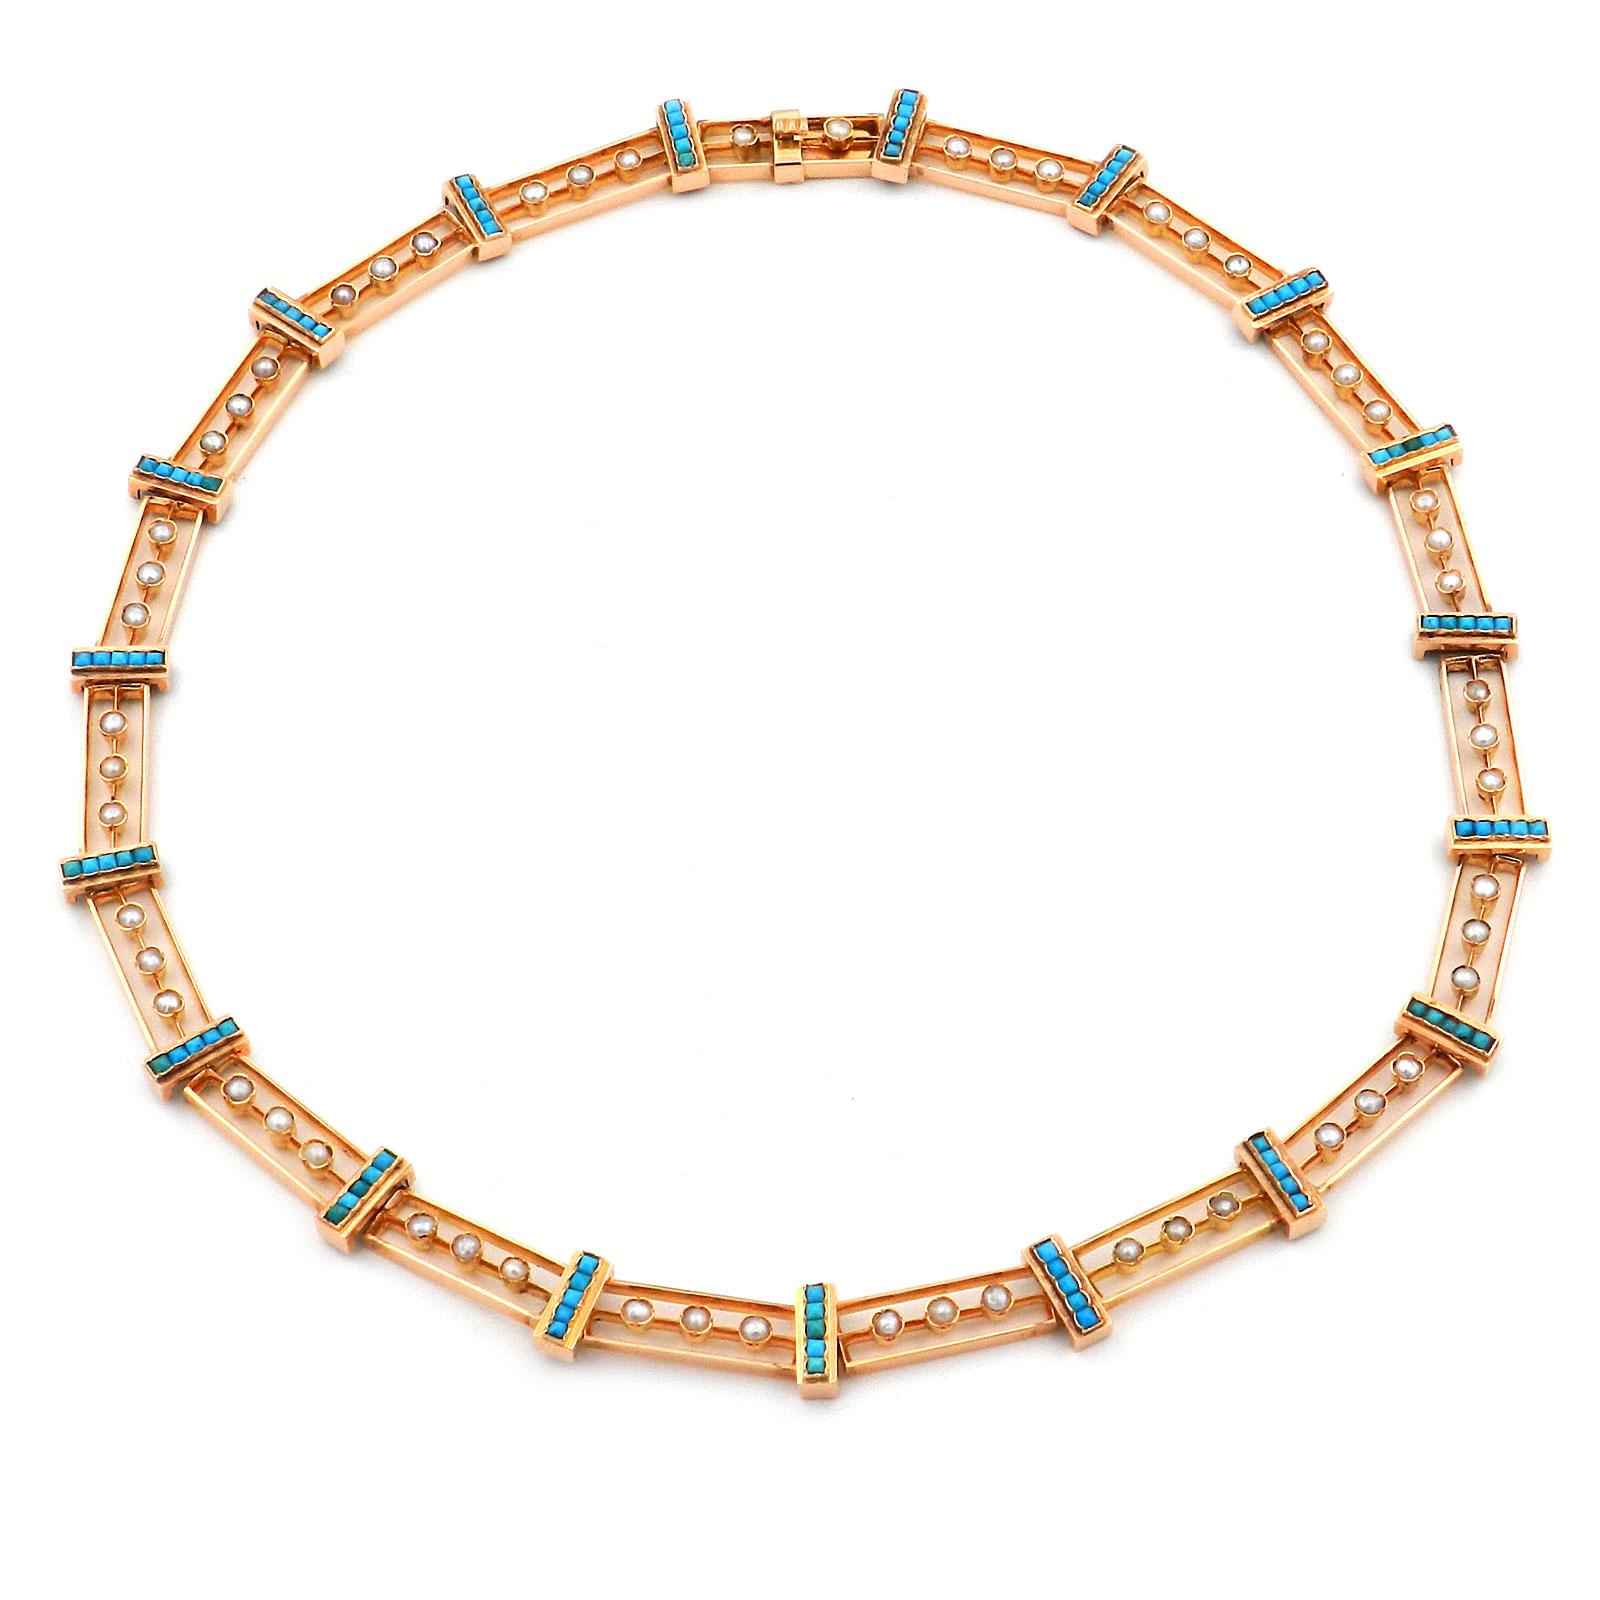 Antique 18K Gold Turquoise and Oriental Pearl Necklace, circa 1880

Decorative Etruscan Style gold necklace made of oblong, openwork links, movable mount and set with countless oriental pearls, the rod-shaped intermediate parts set with turquoise